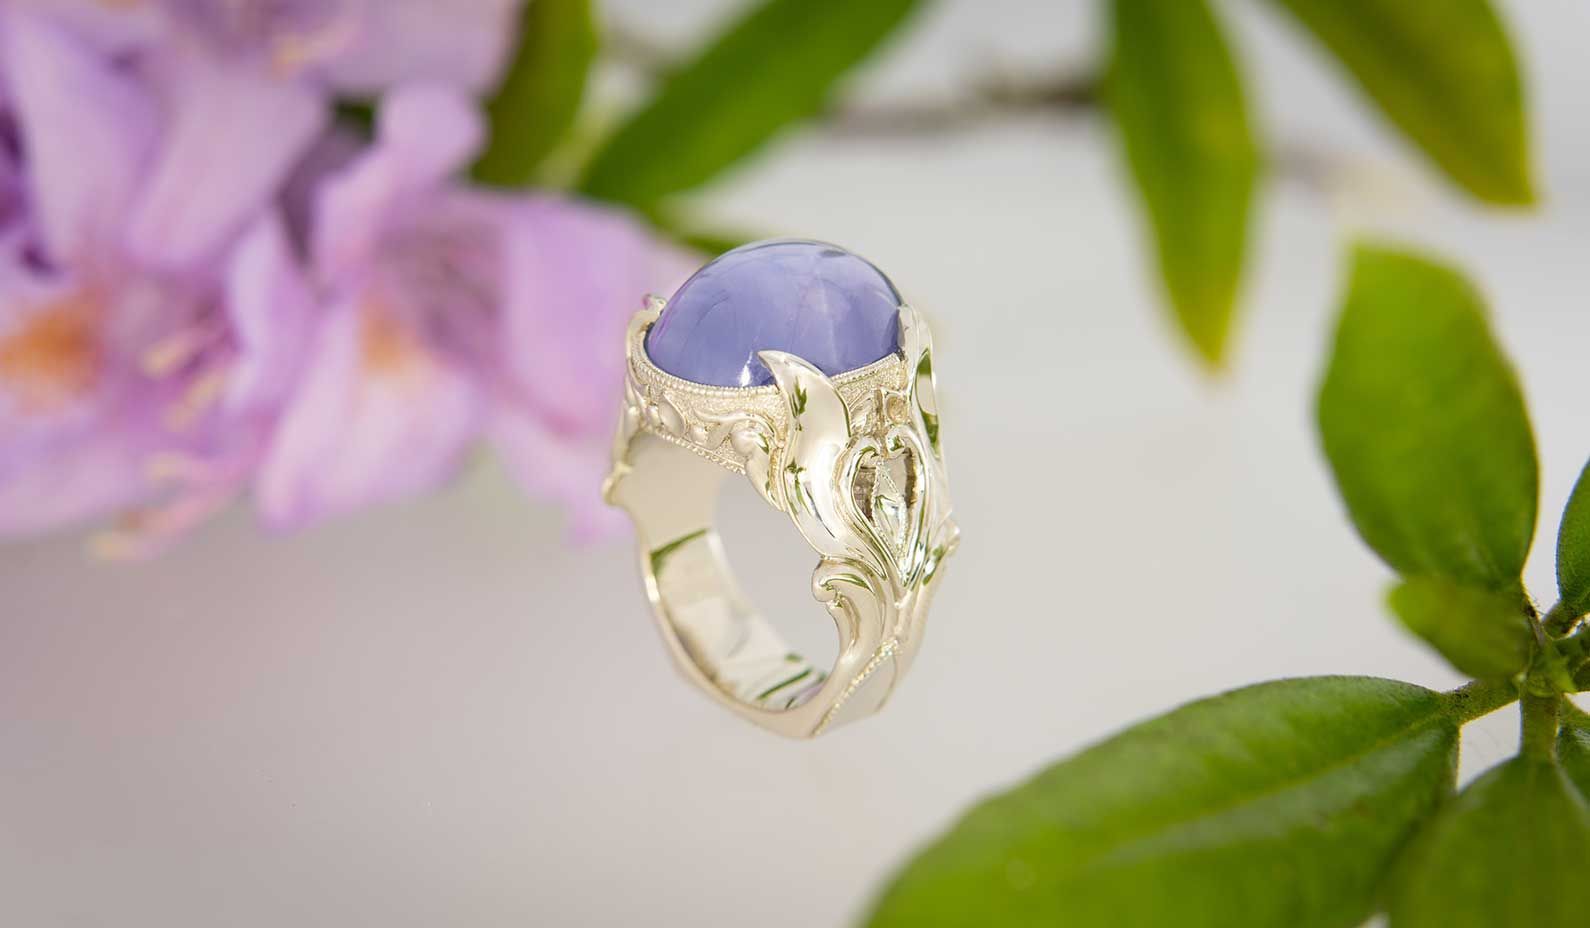 A ring with a periwinkle stone